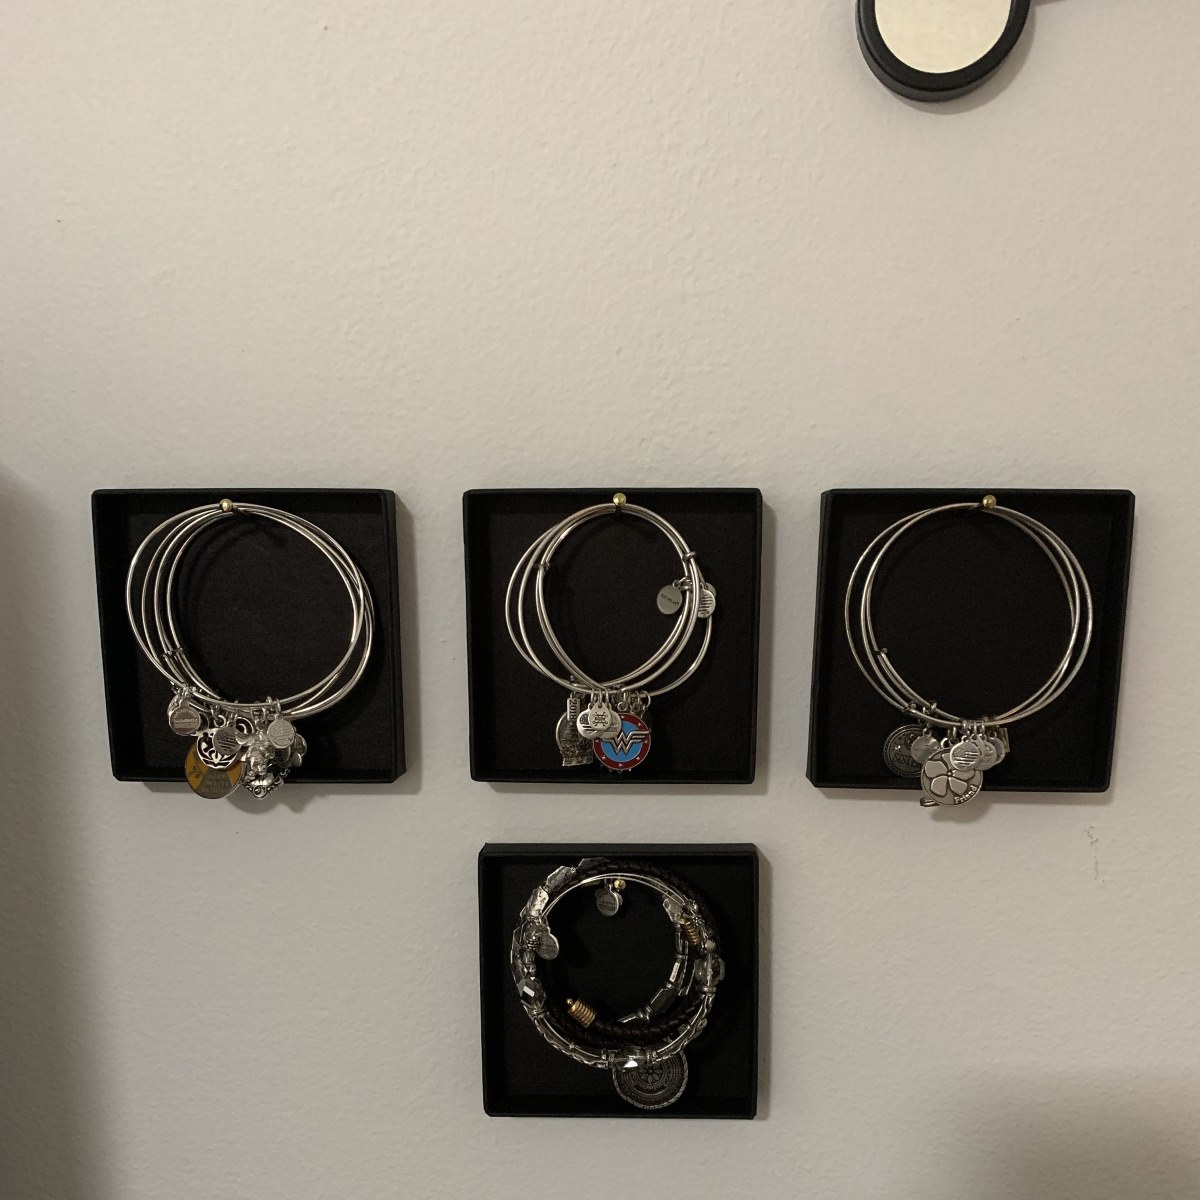 How To Store Alex And Ani Bracelets